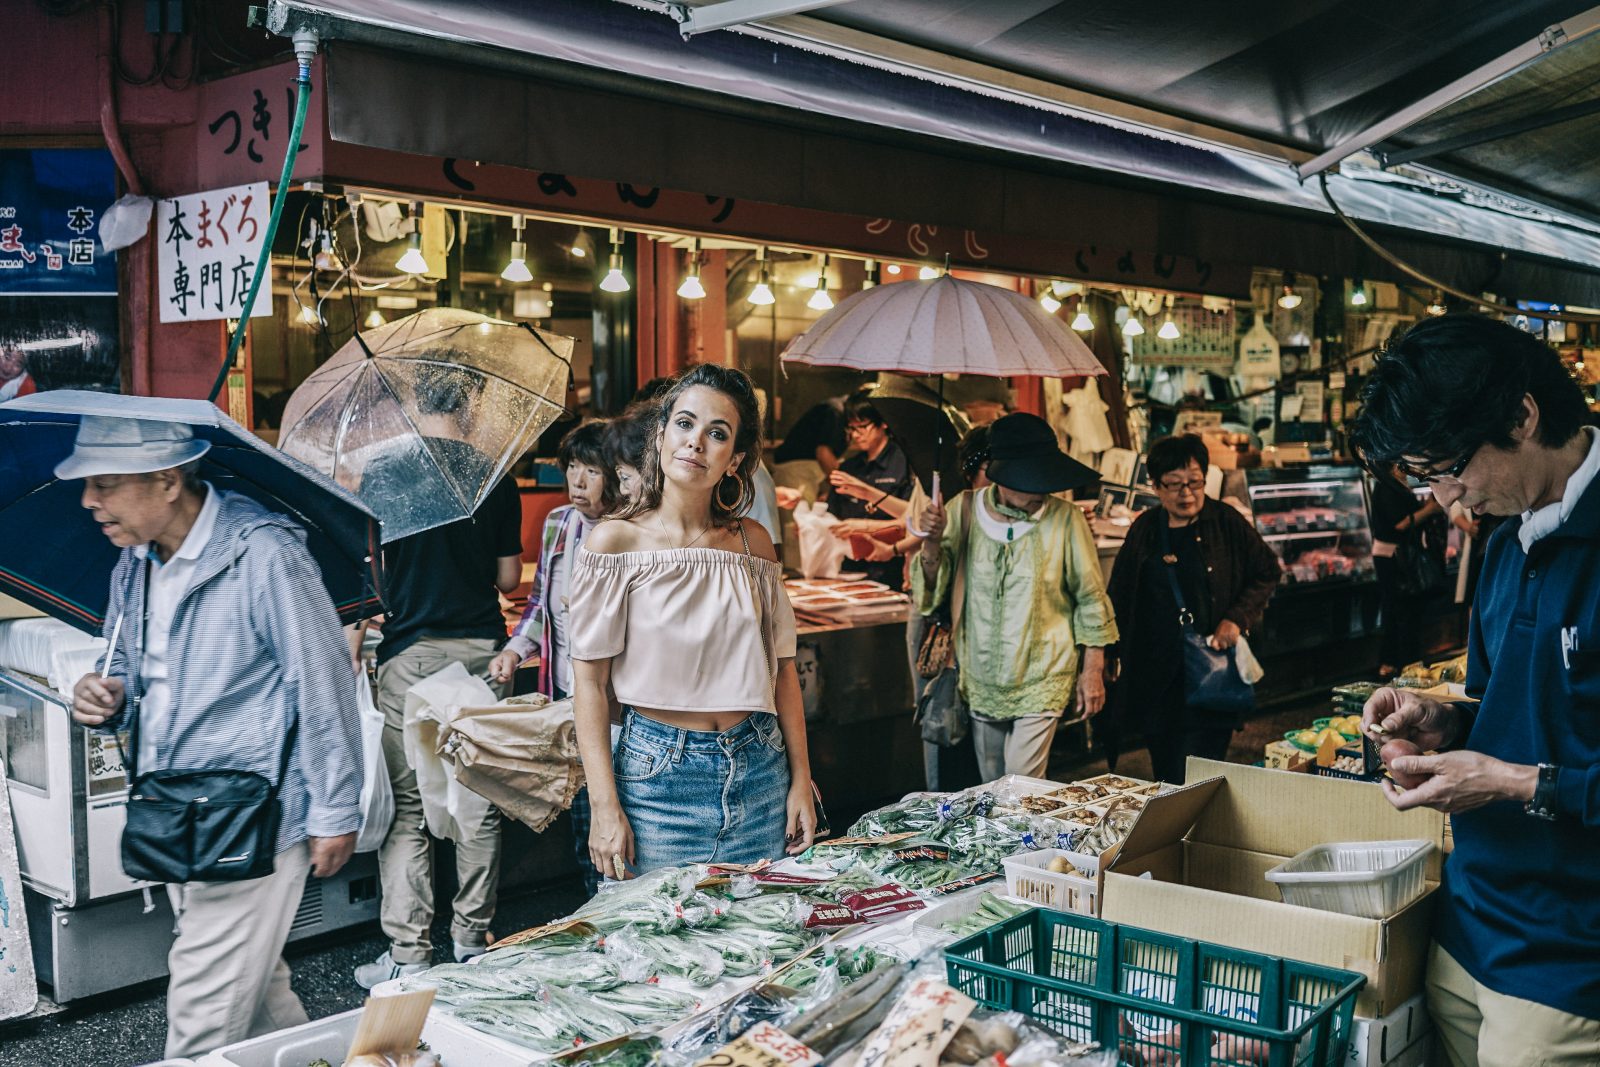 Tokyo_Travel_Guide-Fish_Market-Harajuku-Levis_Denim_Skirt-Off_The_Shoulders_Top-YSL_Sneakers-Outfit-Collage_Vintage-Street_Style-70